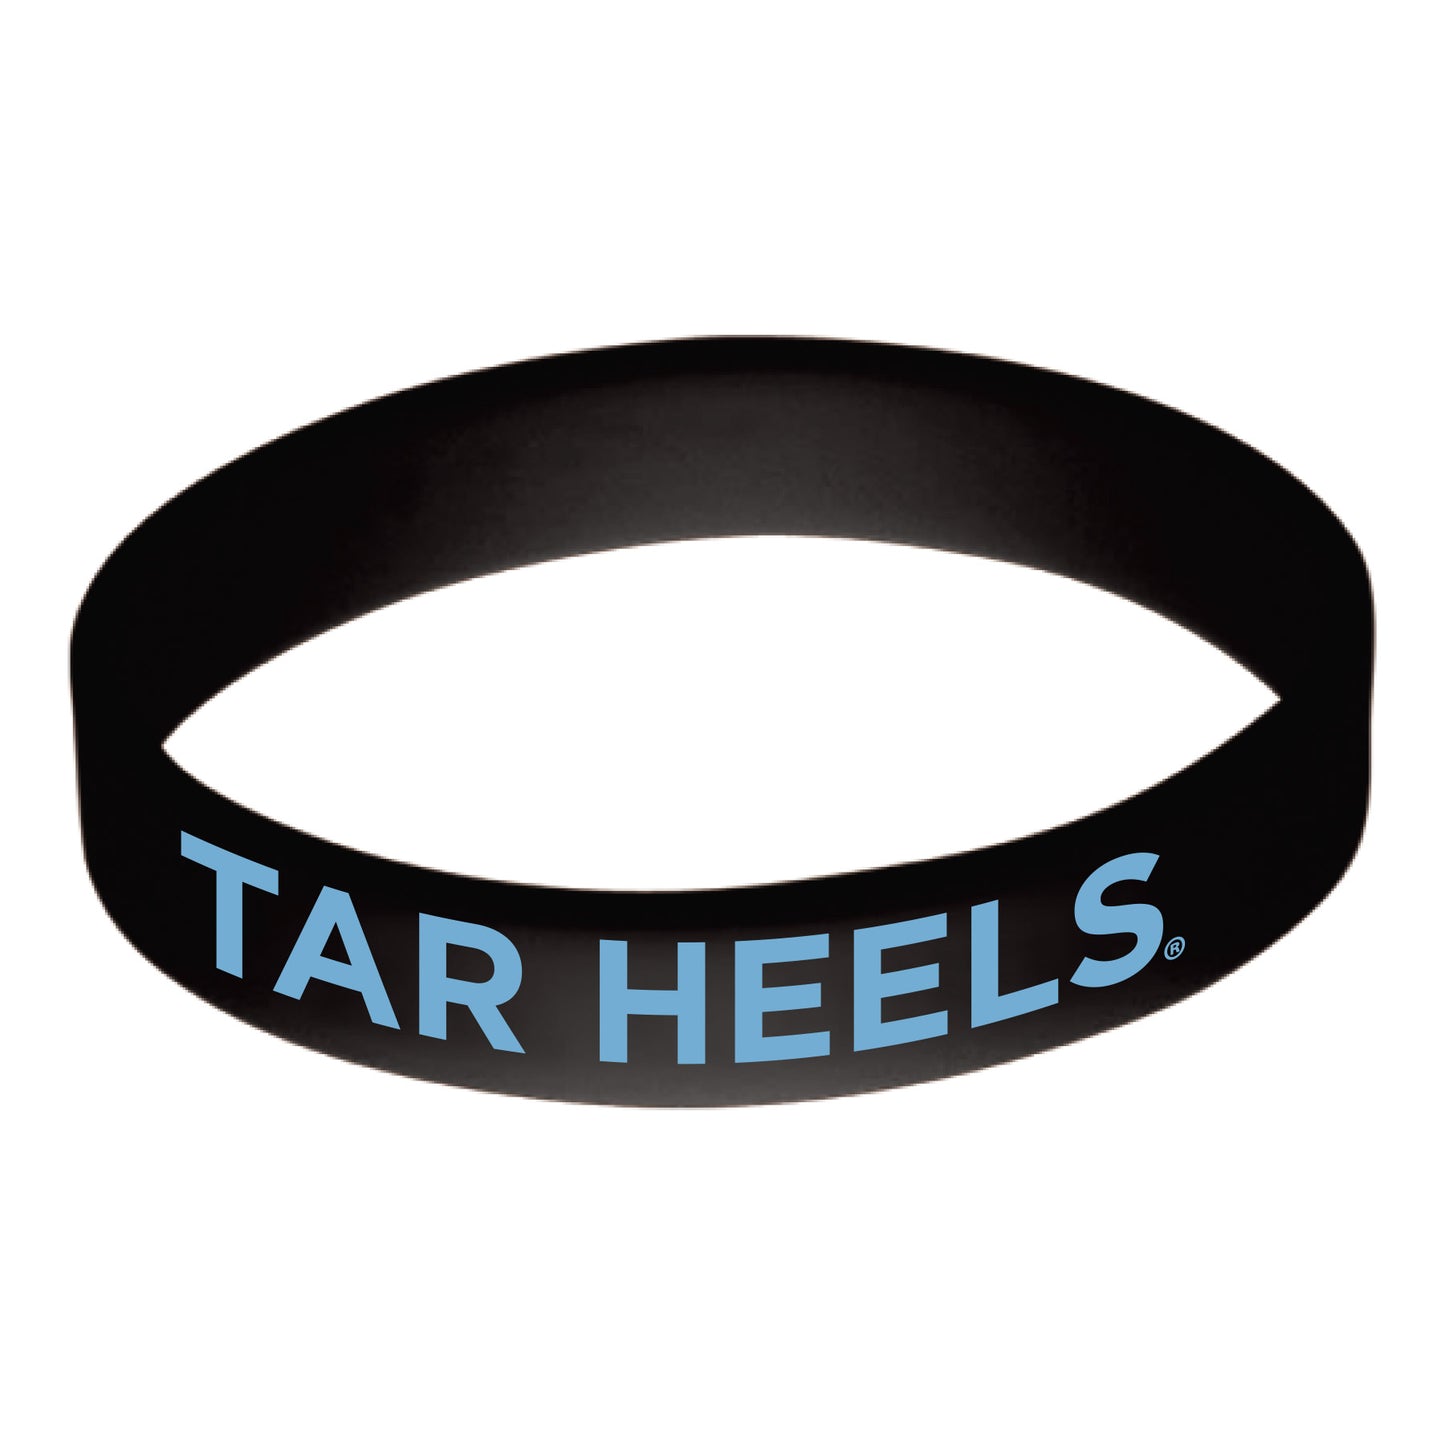 TAR HEELS Black Rubber Wristband for UNC Fans